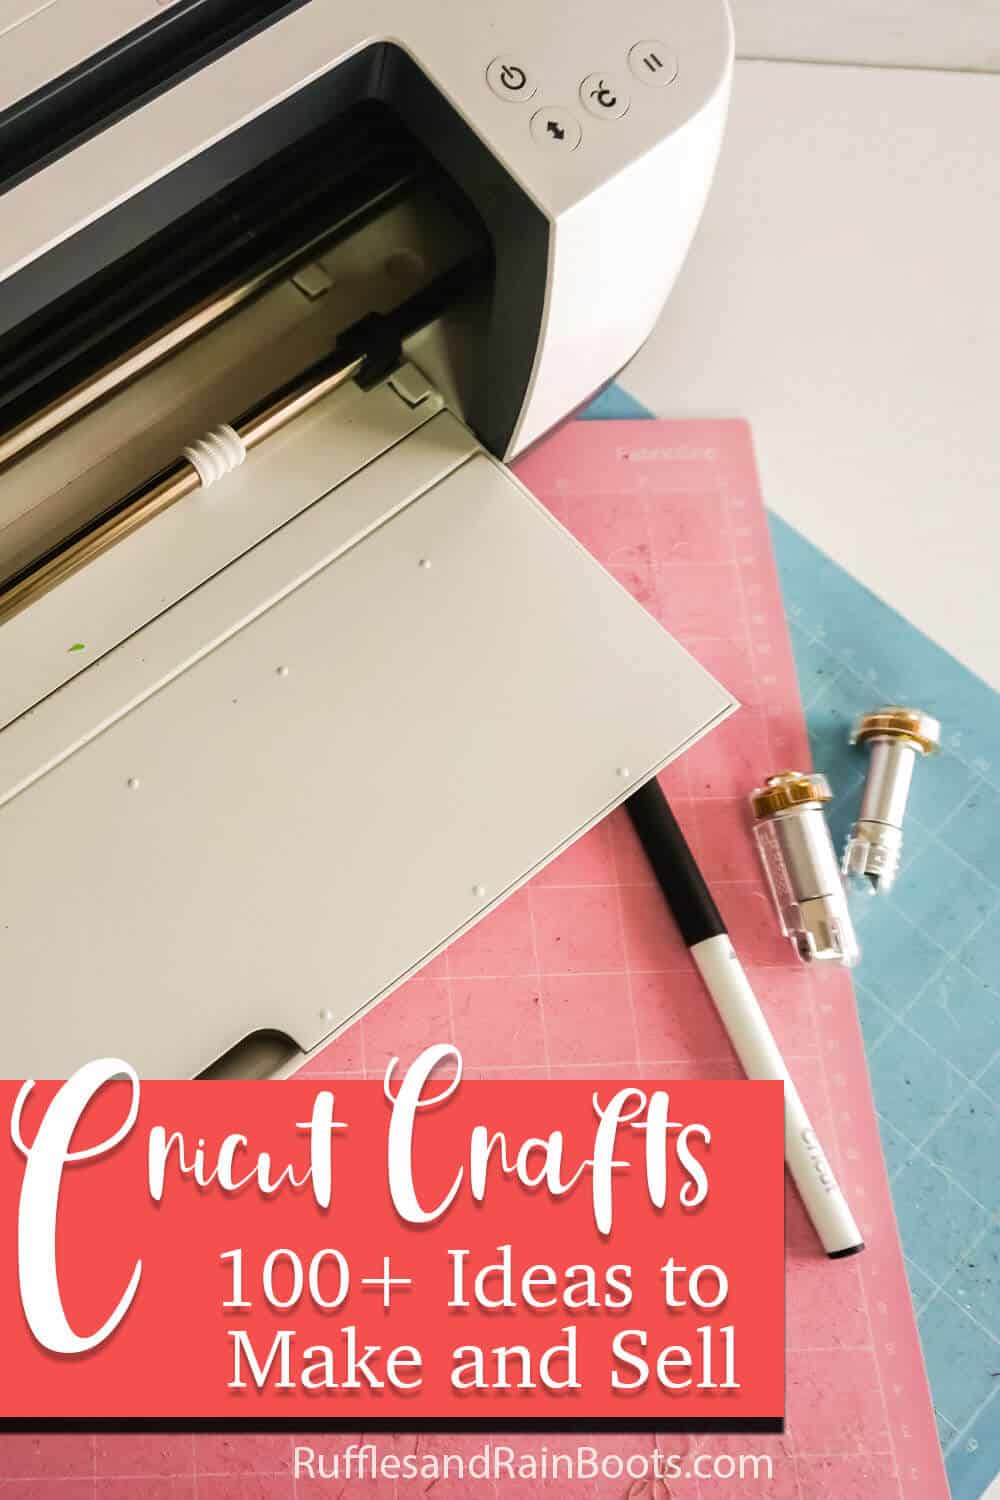 overhead view of cricut tools to cut craft fair with text which reads cricut crafts 100+ideas to make and sell